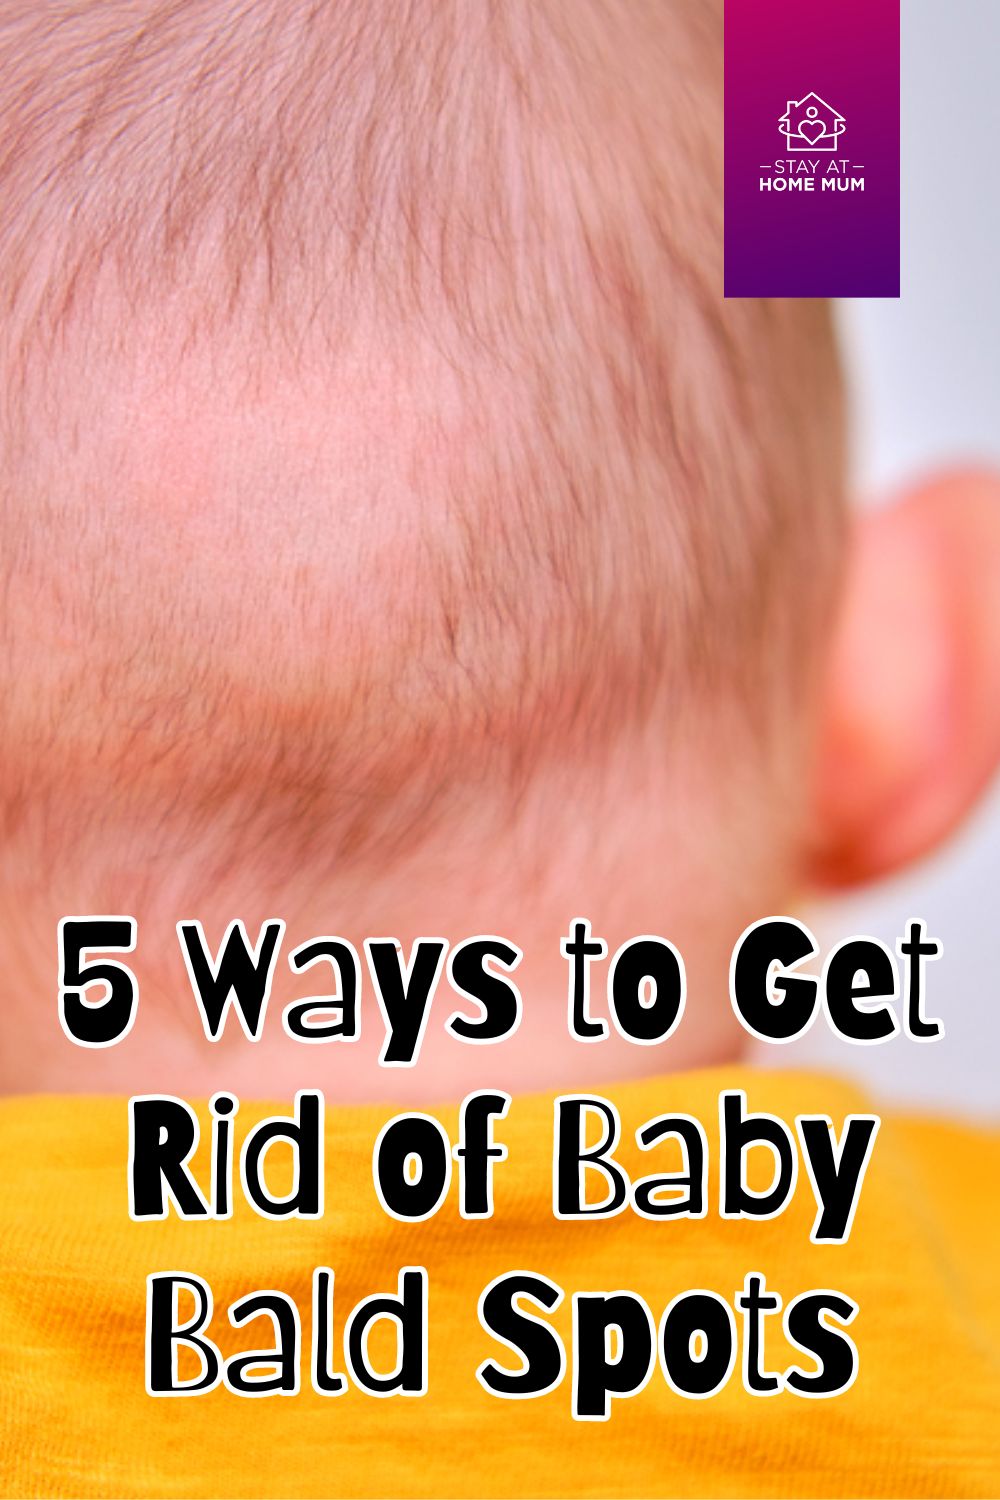 5 Ways to Get Rid of Baby Bald Spots Pinnable